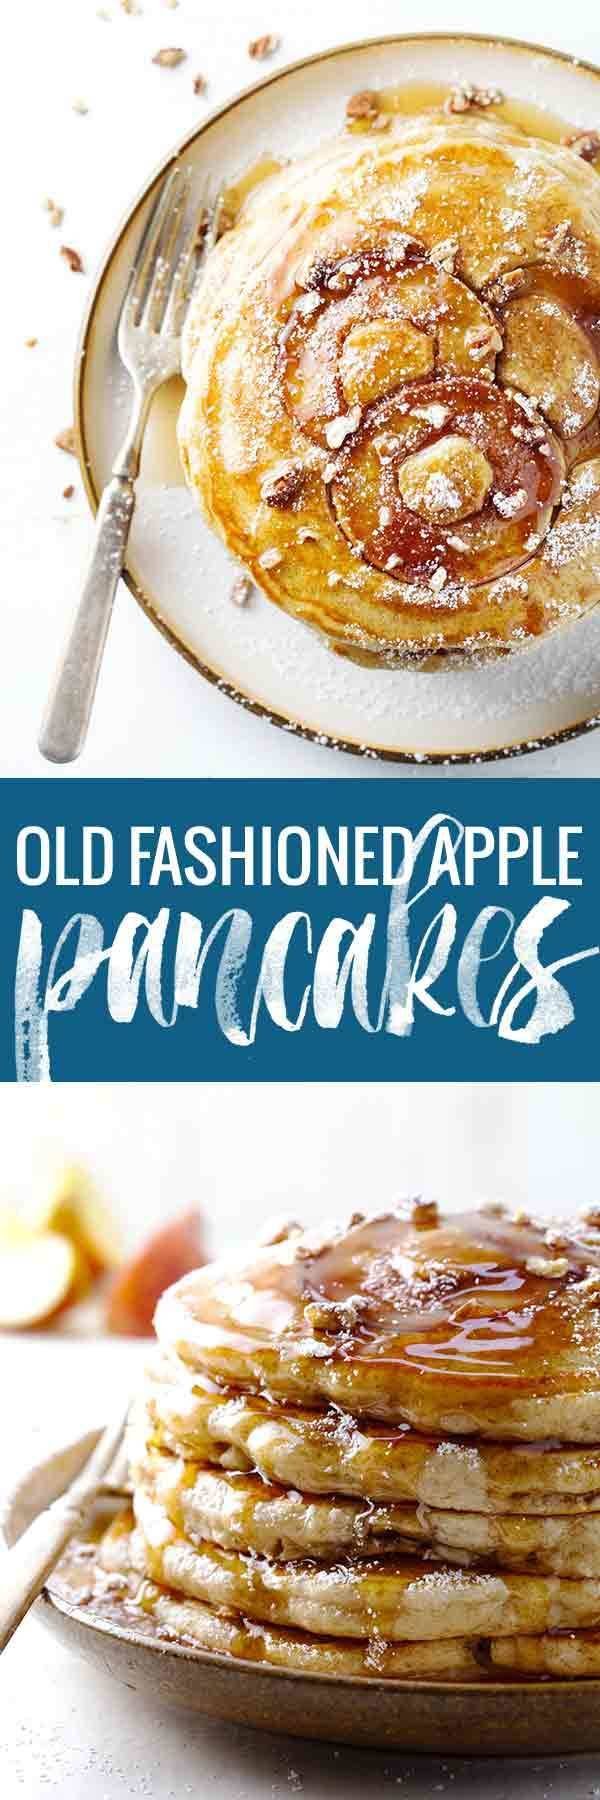 Old Fashioned Whole Wheat Apple Pancakes - the apples are baked right into these fluffy, old fashioned pancakes, and the topping possibilities are endless.